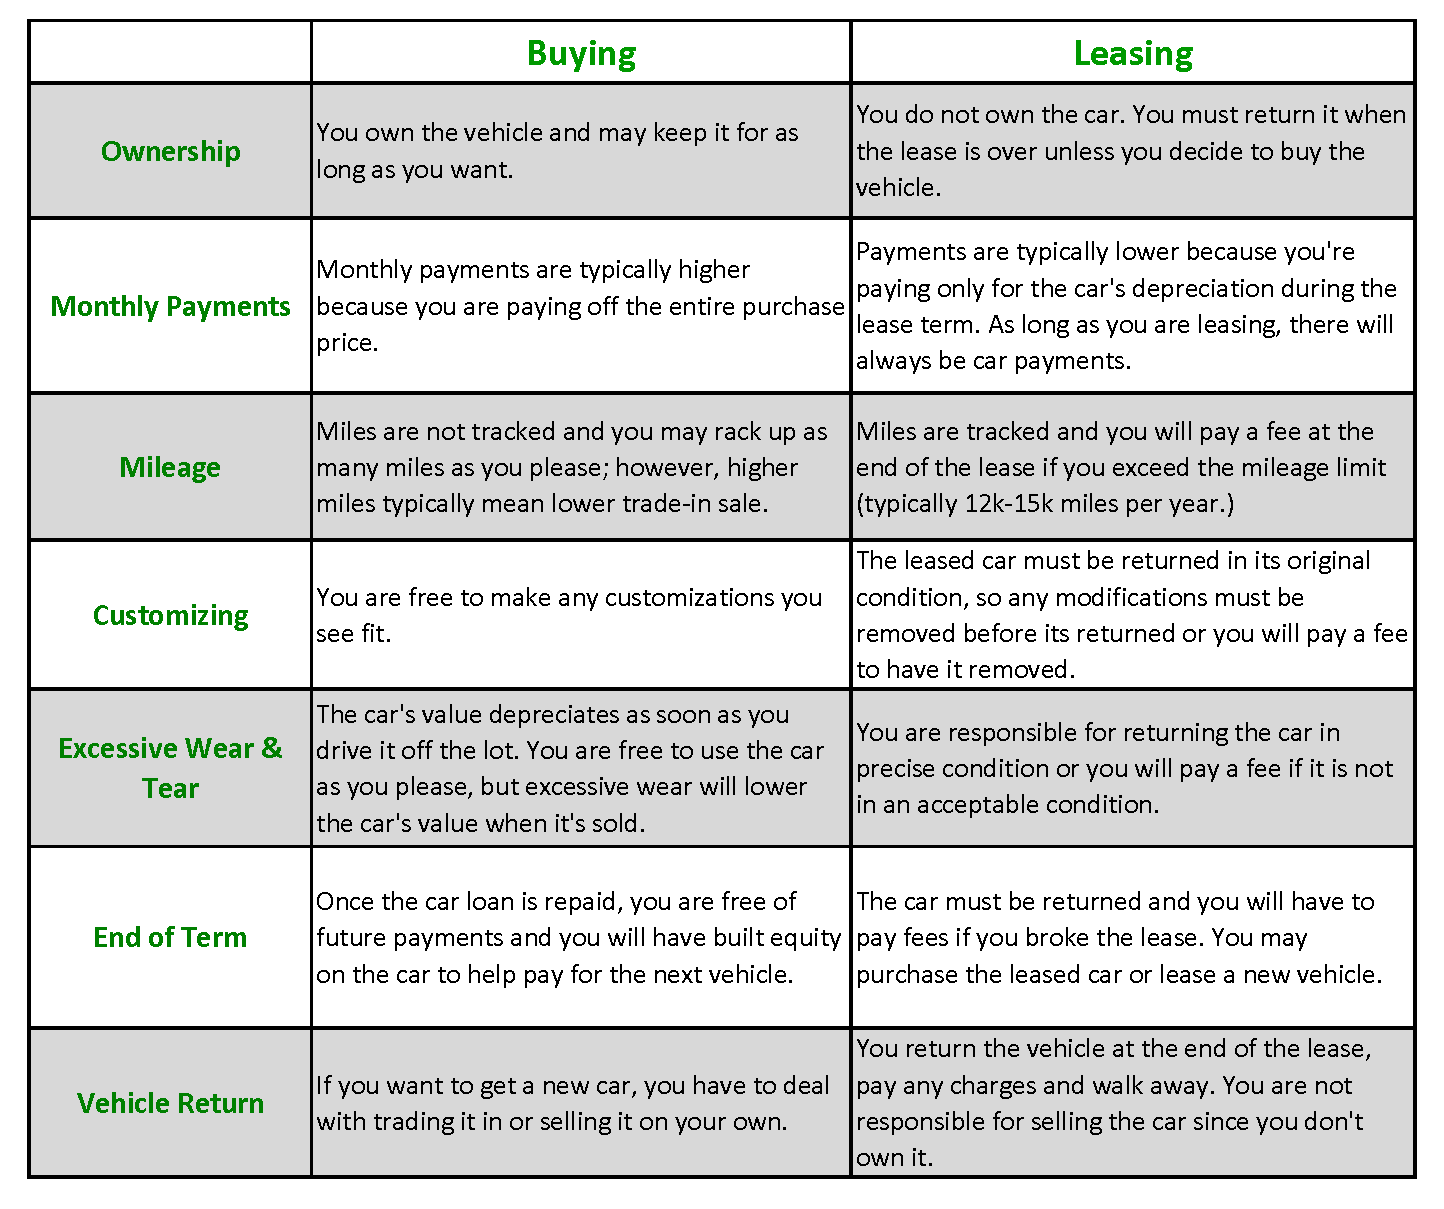 chart compares the difference between leasing and buying car